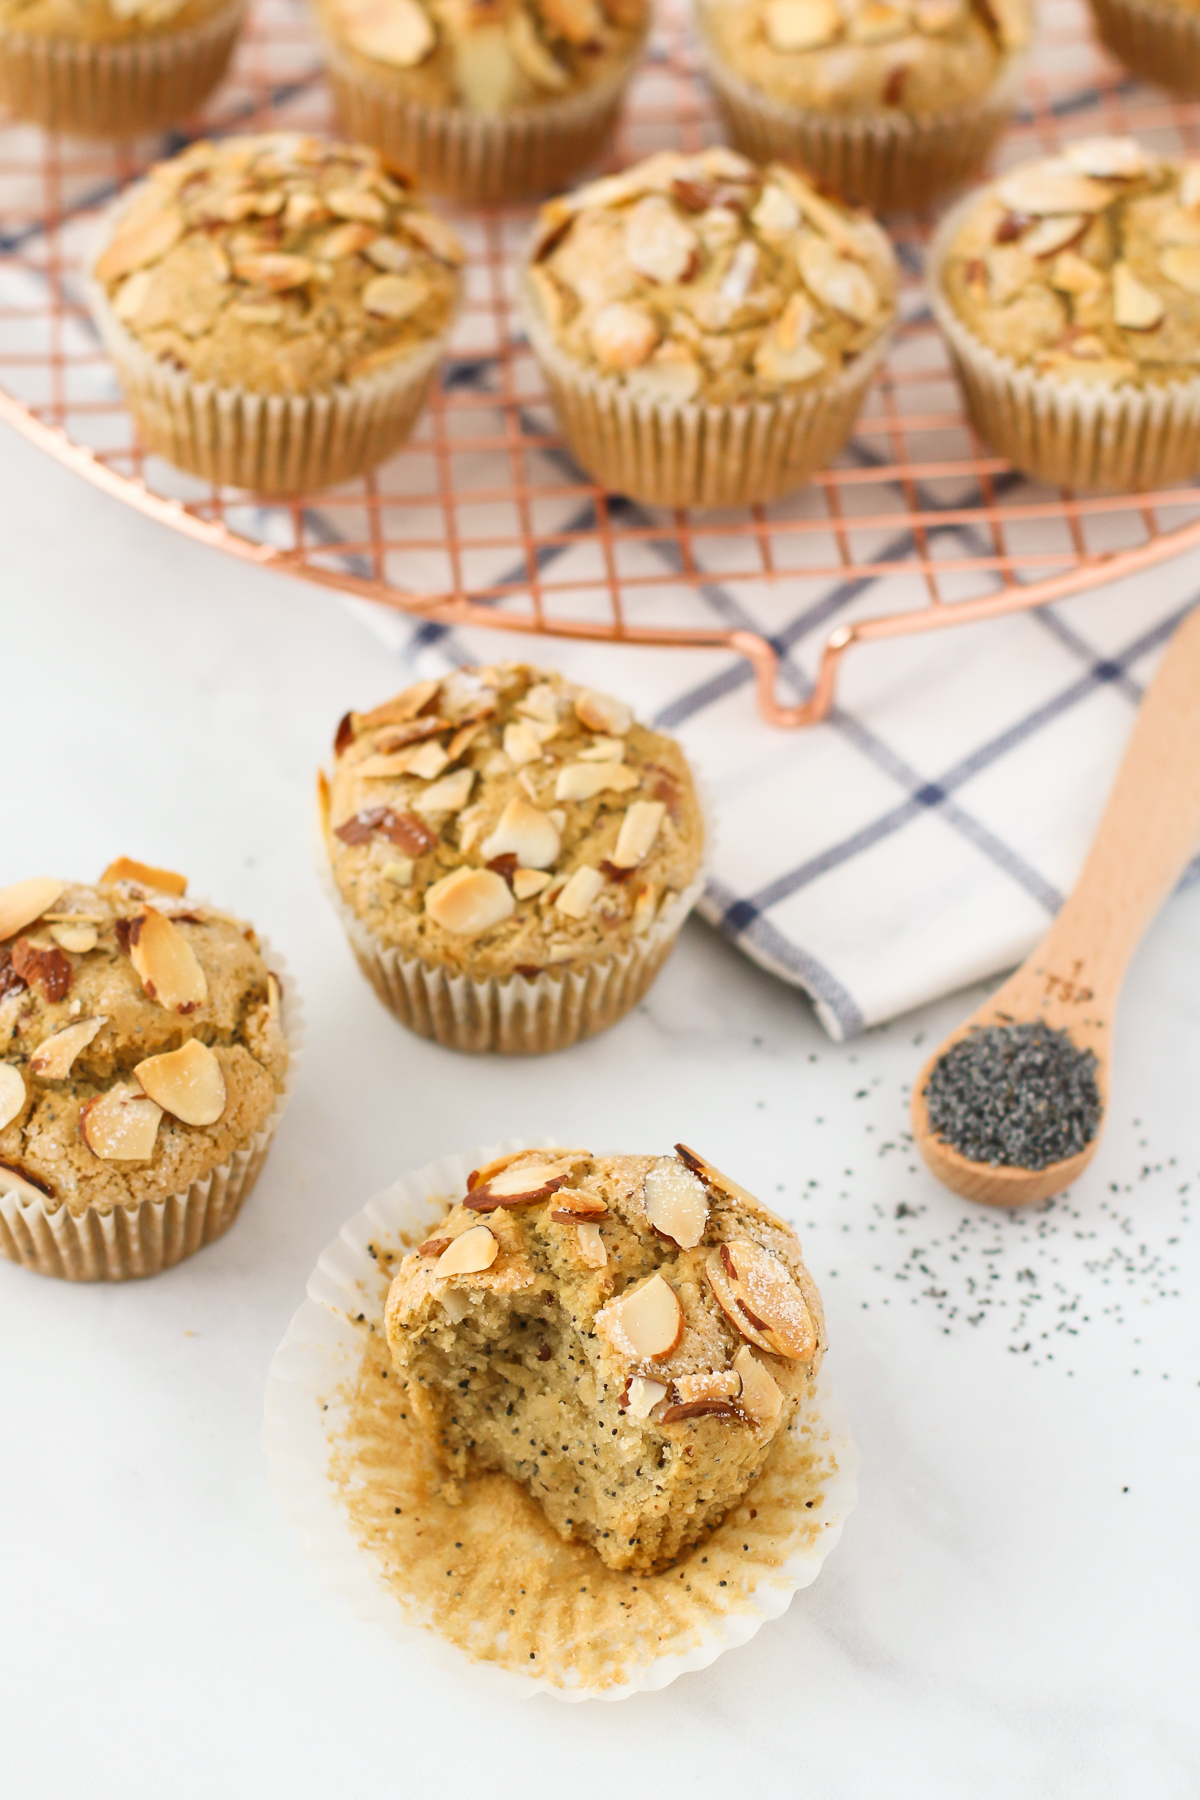 Tender poppyseed muffins, with the crunch of toasted almonds. These gluten free vegan almond poppyseed muffins are baked to perfection!